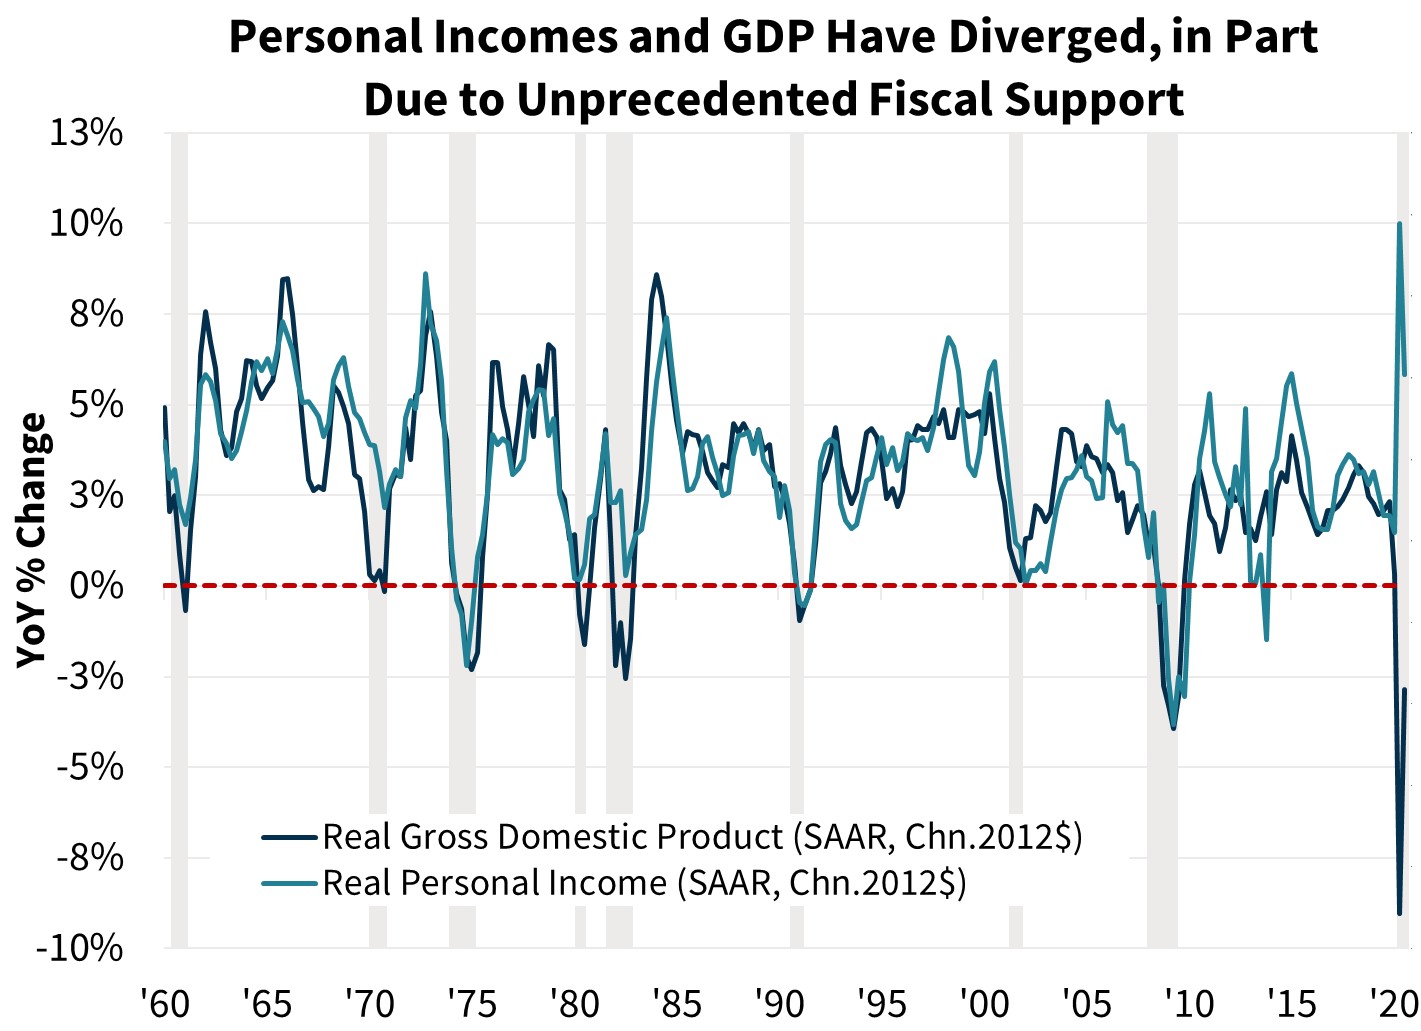  Personal Incomes and GDP have Diverged, in Part Due to Unprecedented Fiscal Support
